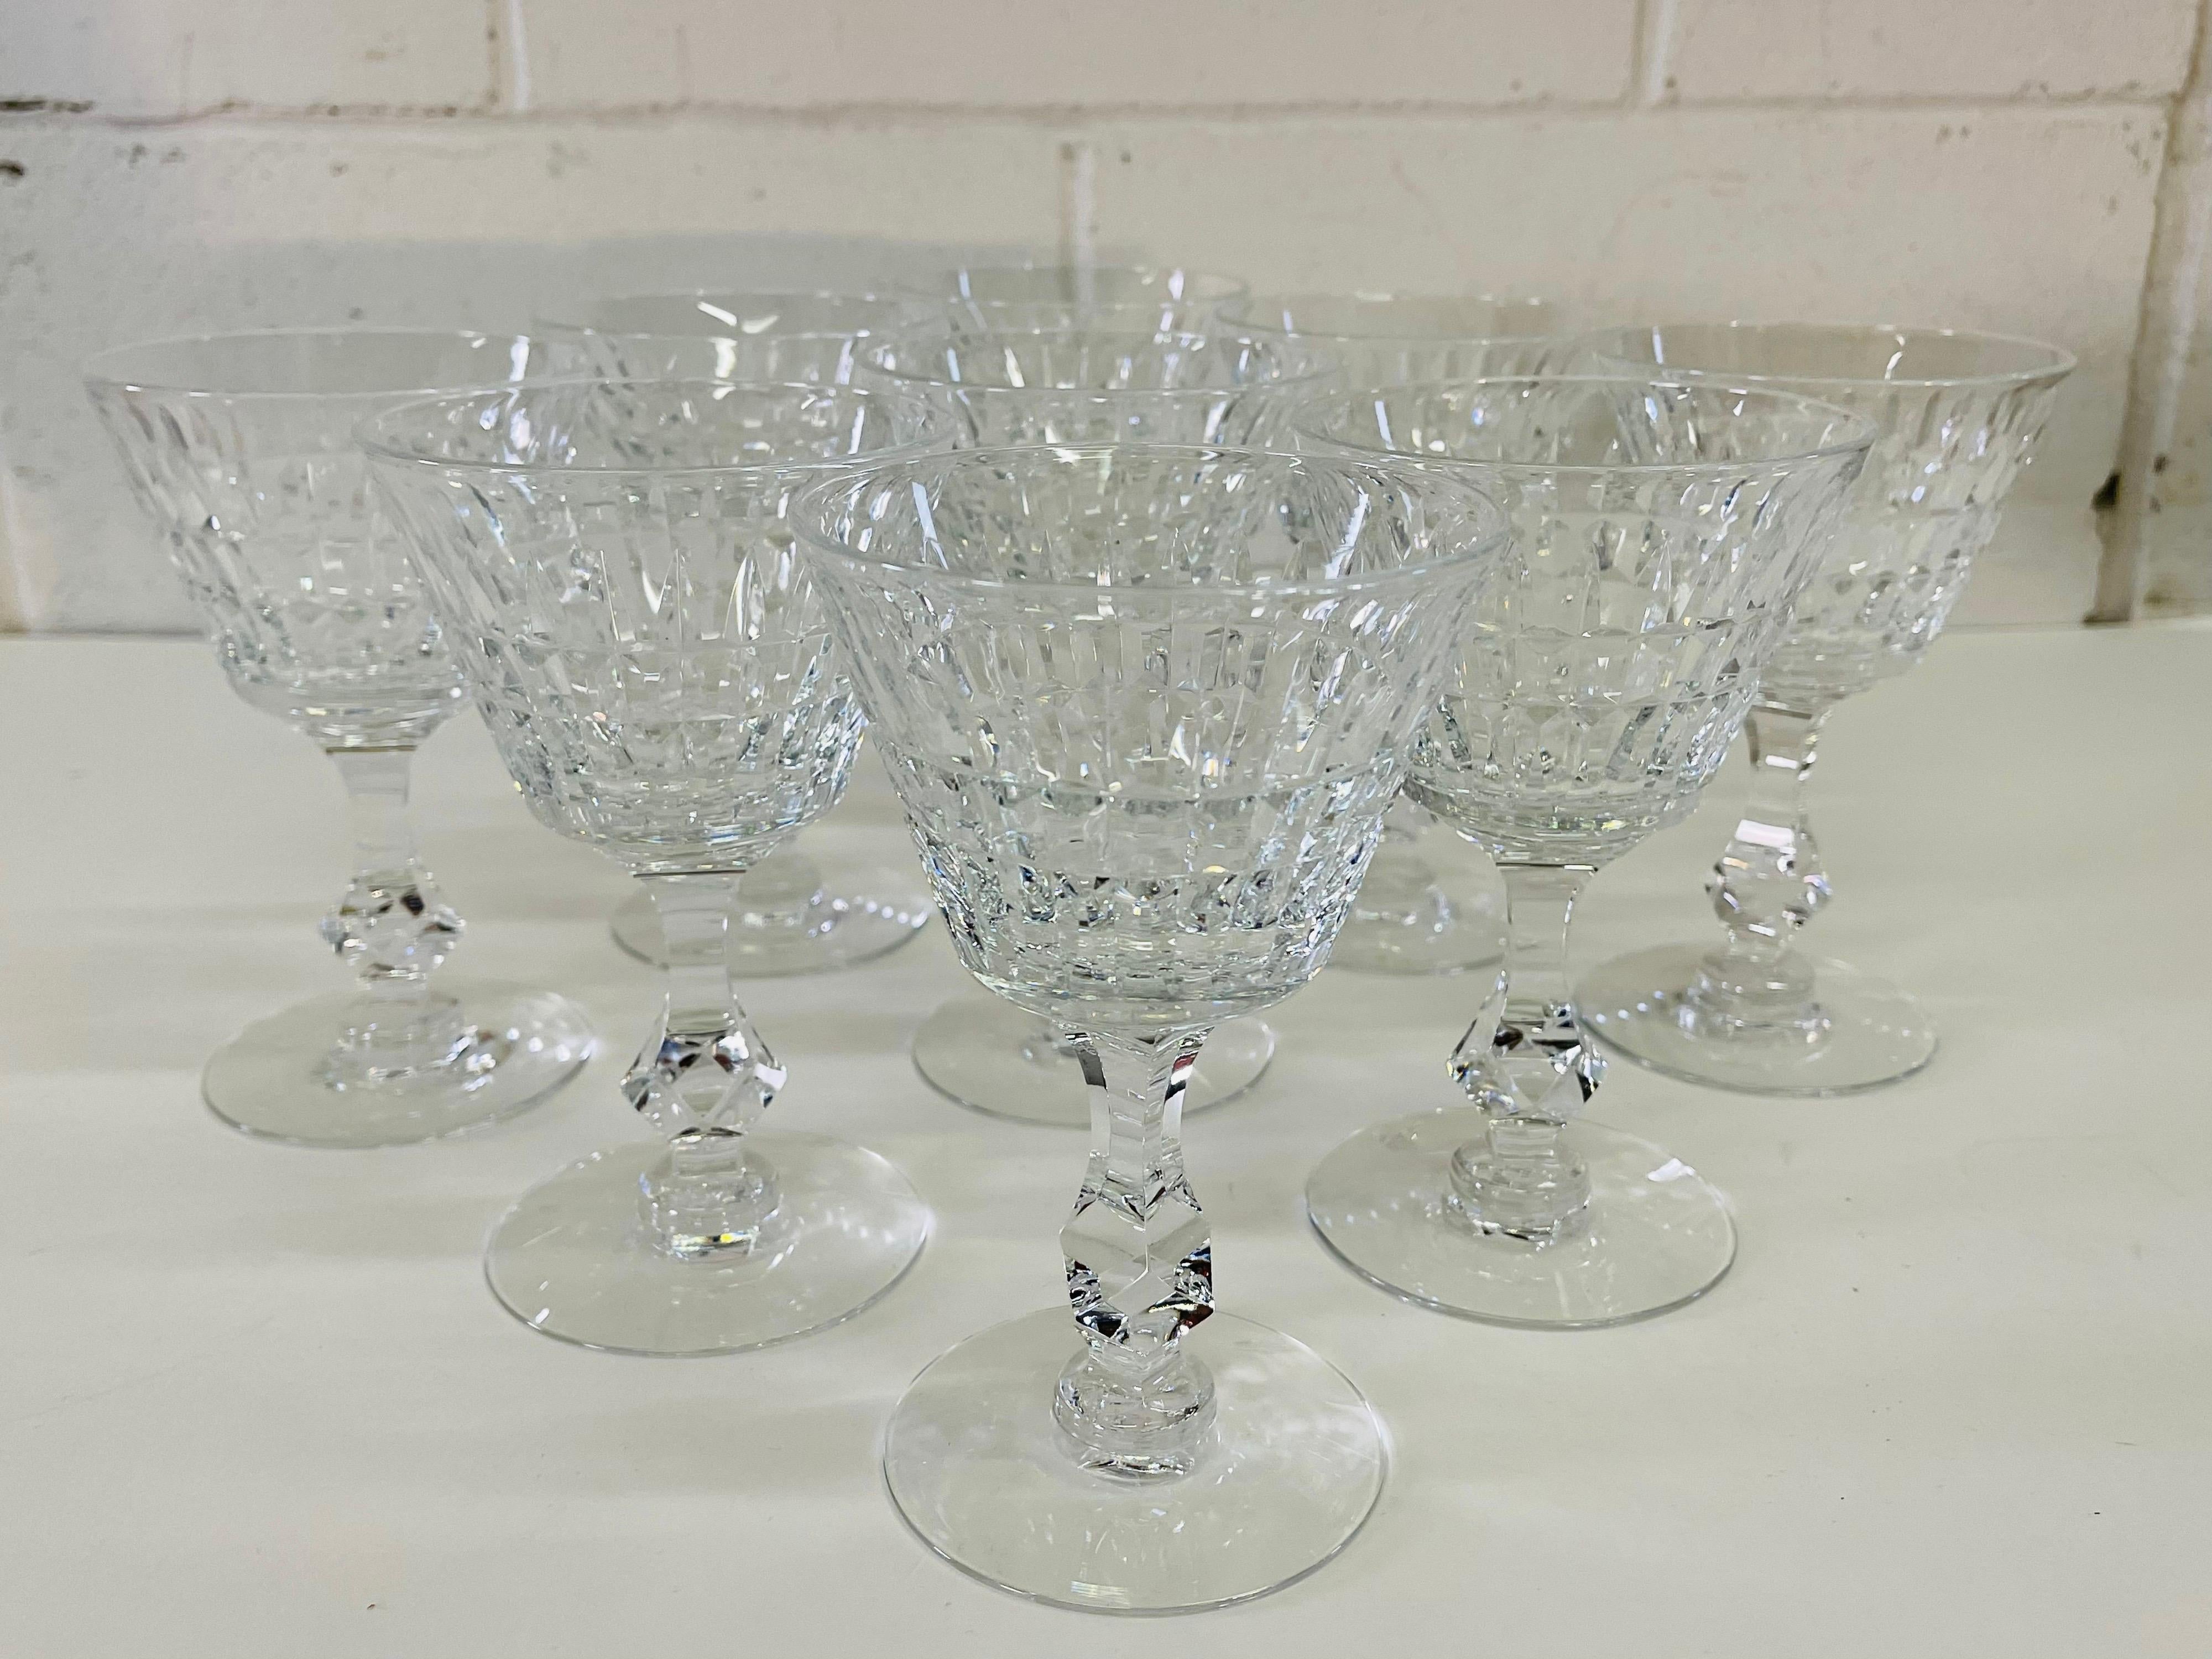 1960s Mitred Cut Crystal Glass Coupes, Set of 9 In Good Condition For Sale In Amherst, NH